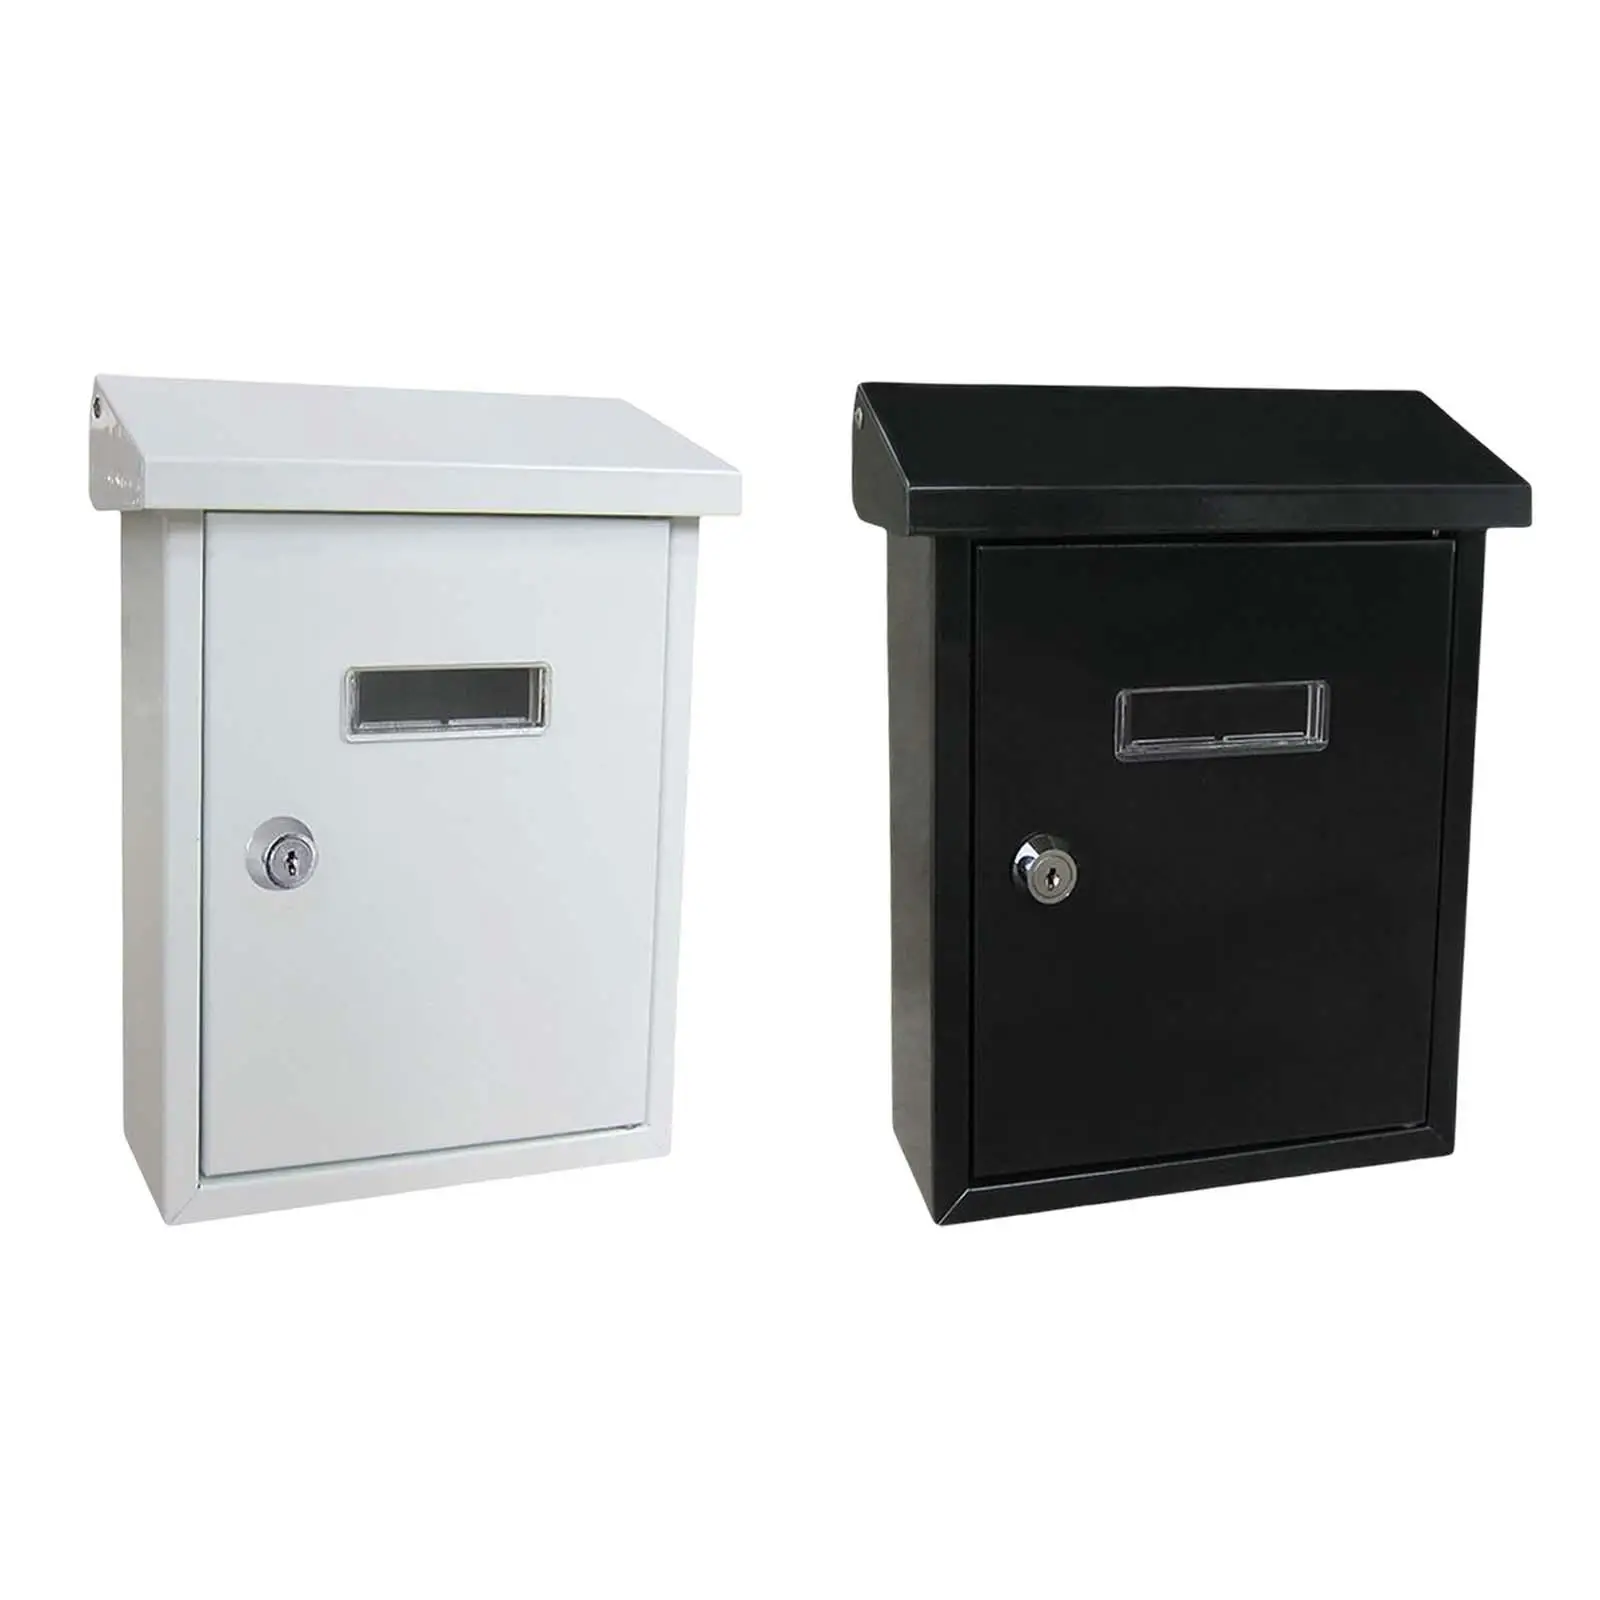 Lockable Wall Mount Mailbox Newspaper Letterbox Mail Box for Business Home Decor Office